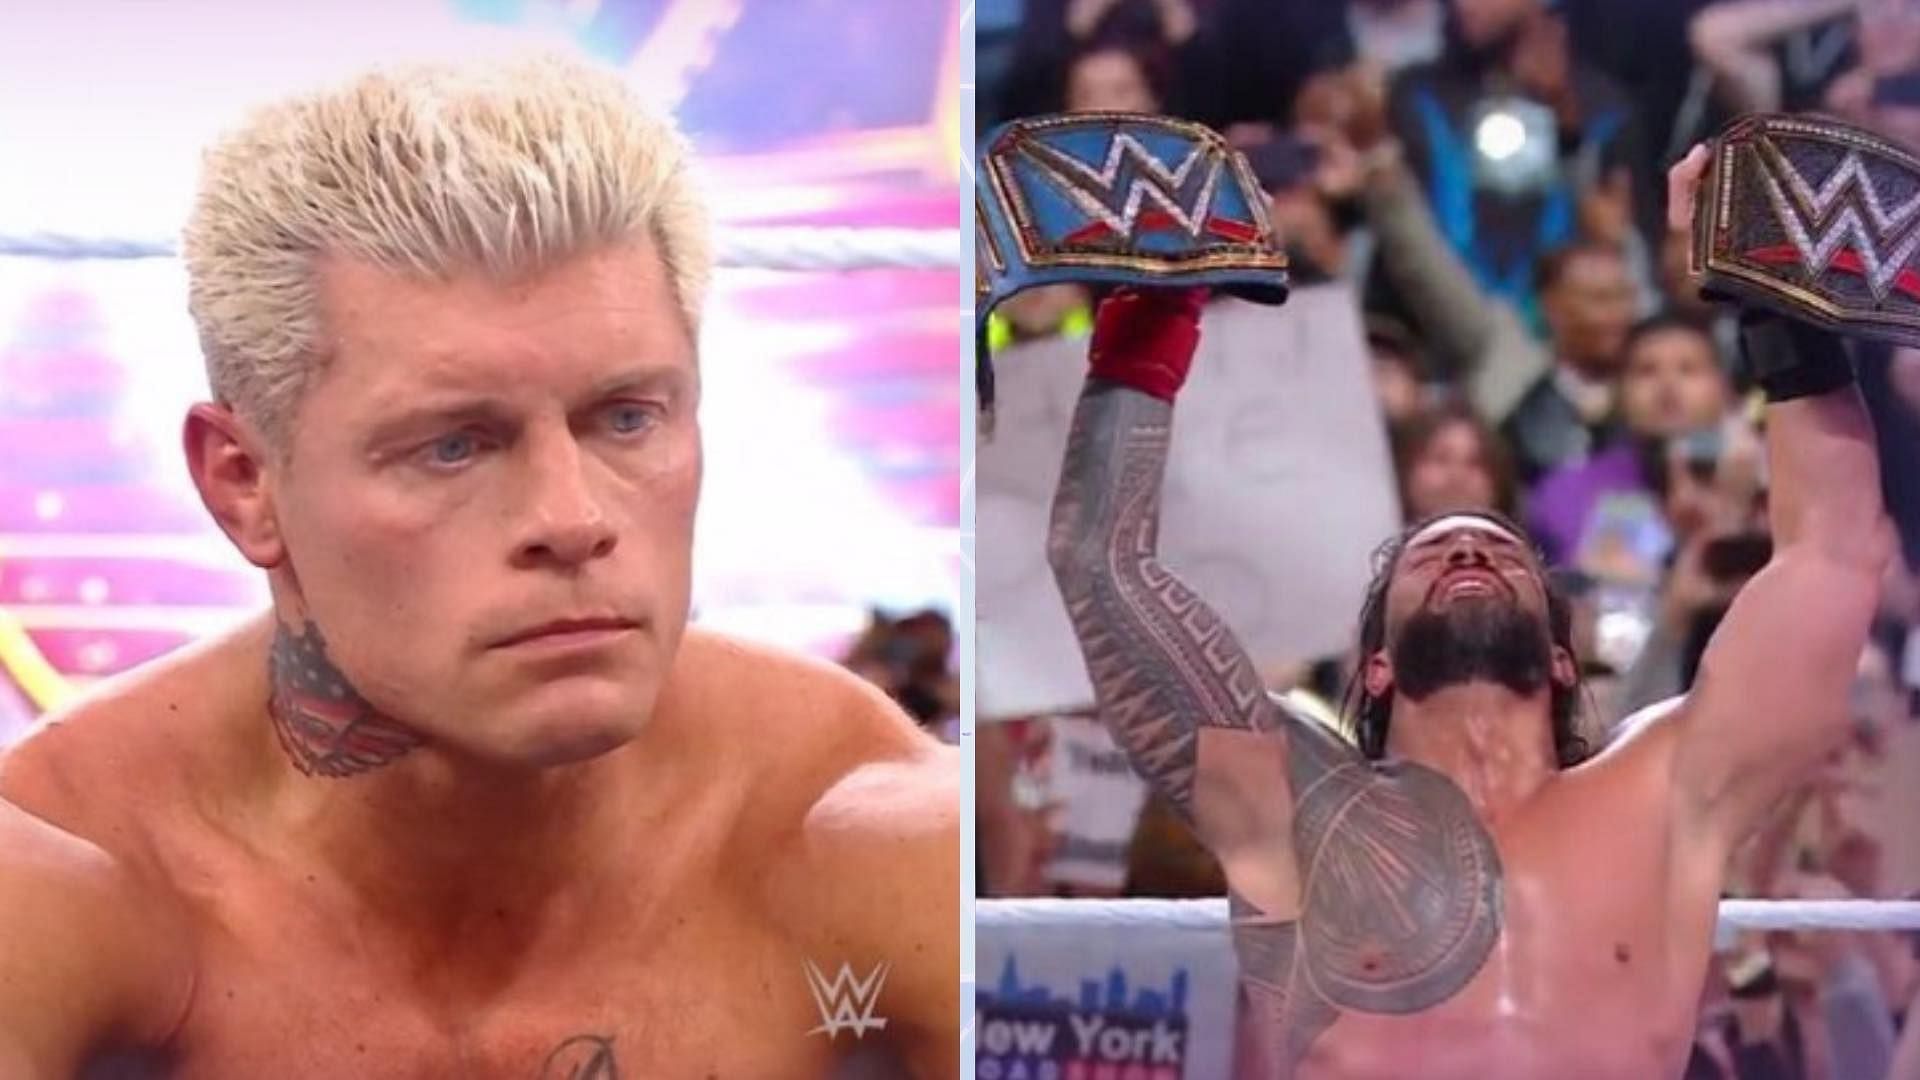 Cody Rhodes on the left, Roman Reigns on the right